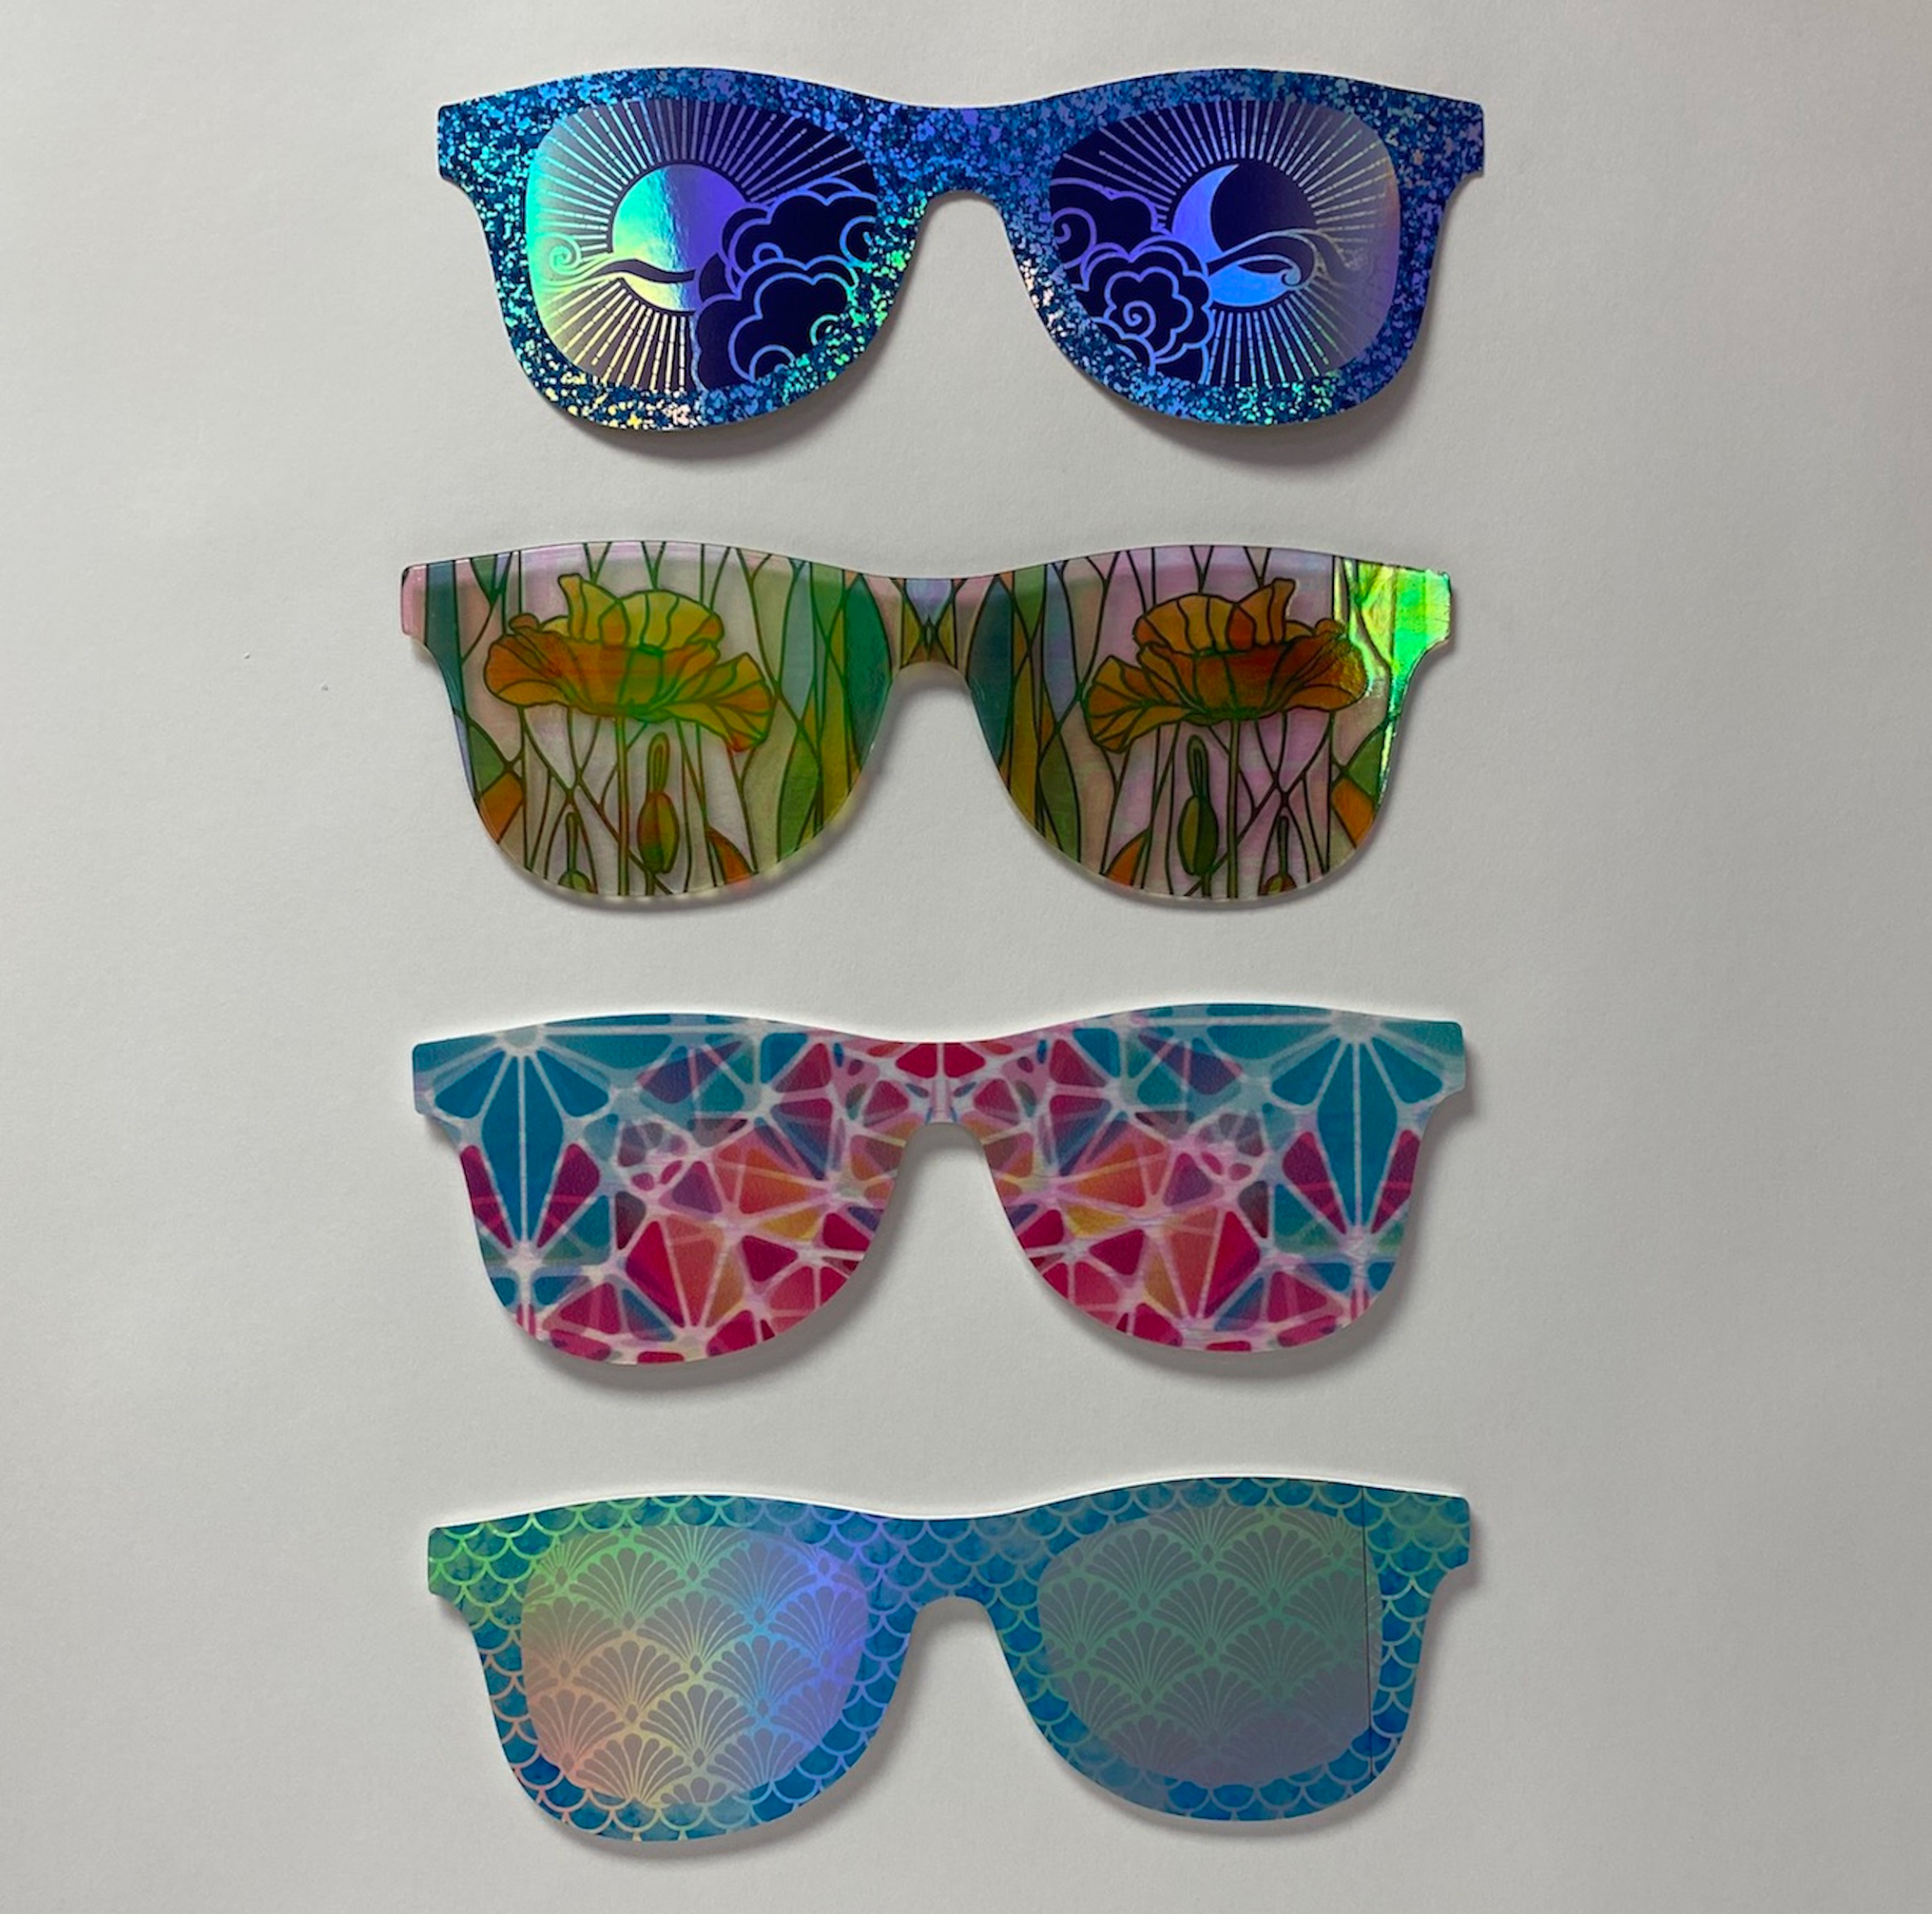 Ace Designs’ Holographic Graphics